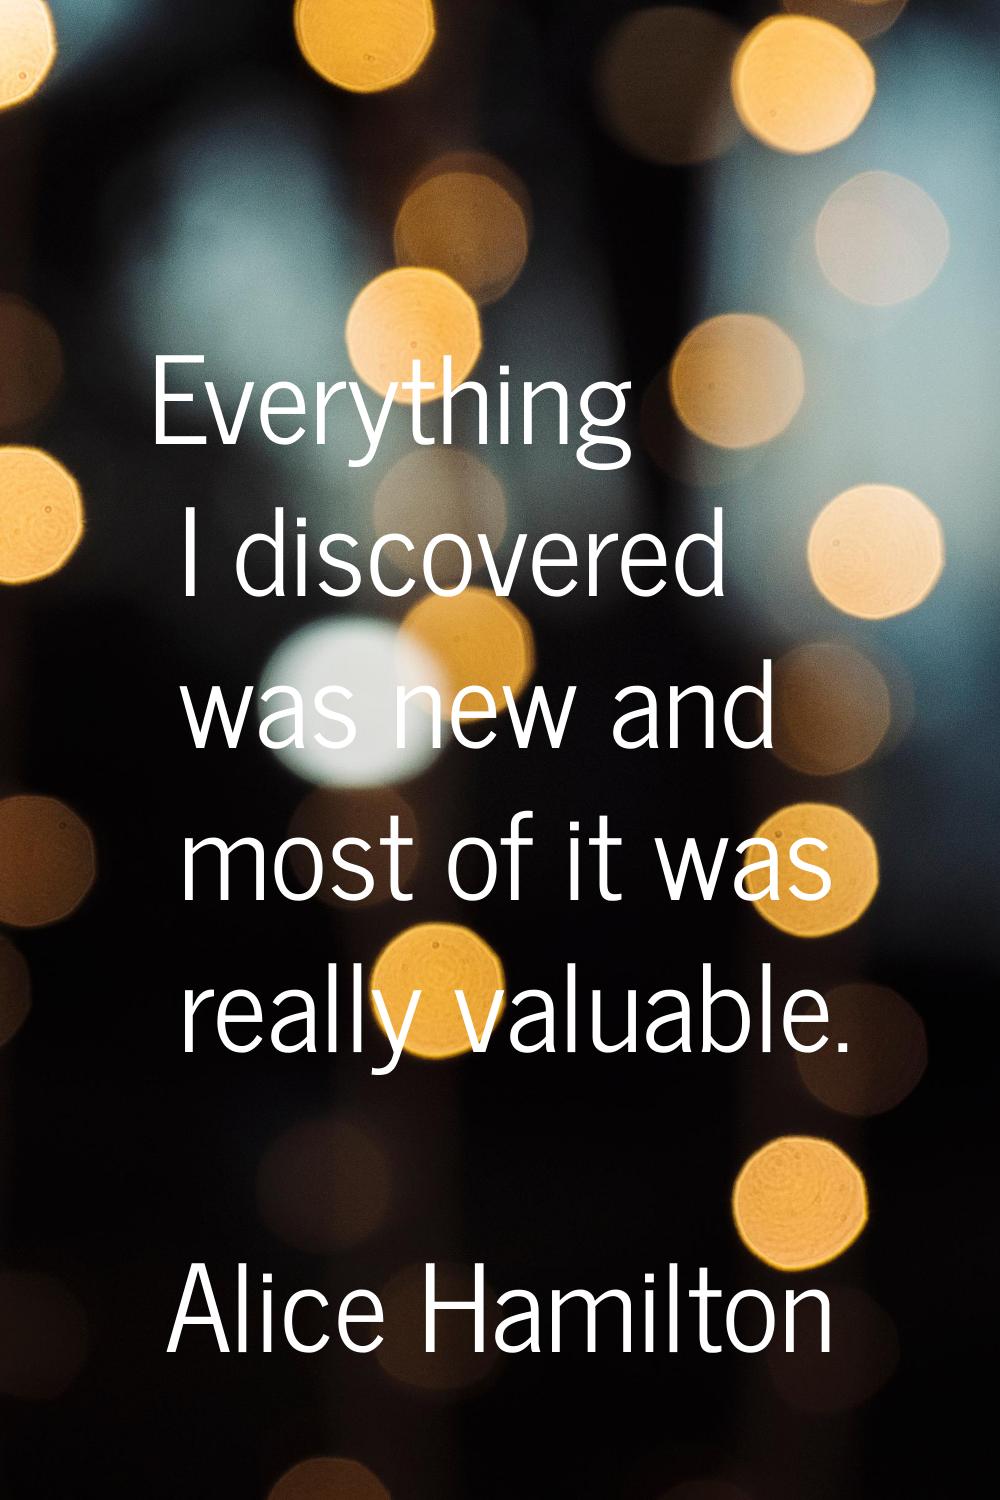 Everything I discovered was new and most of it was really valuable.